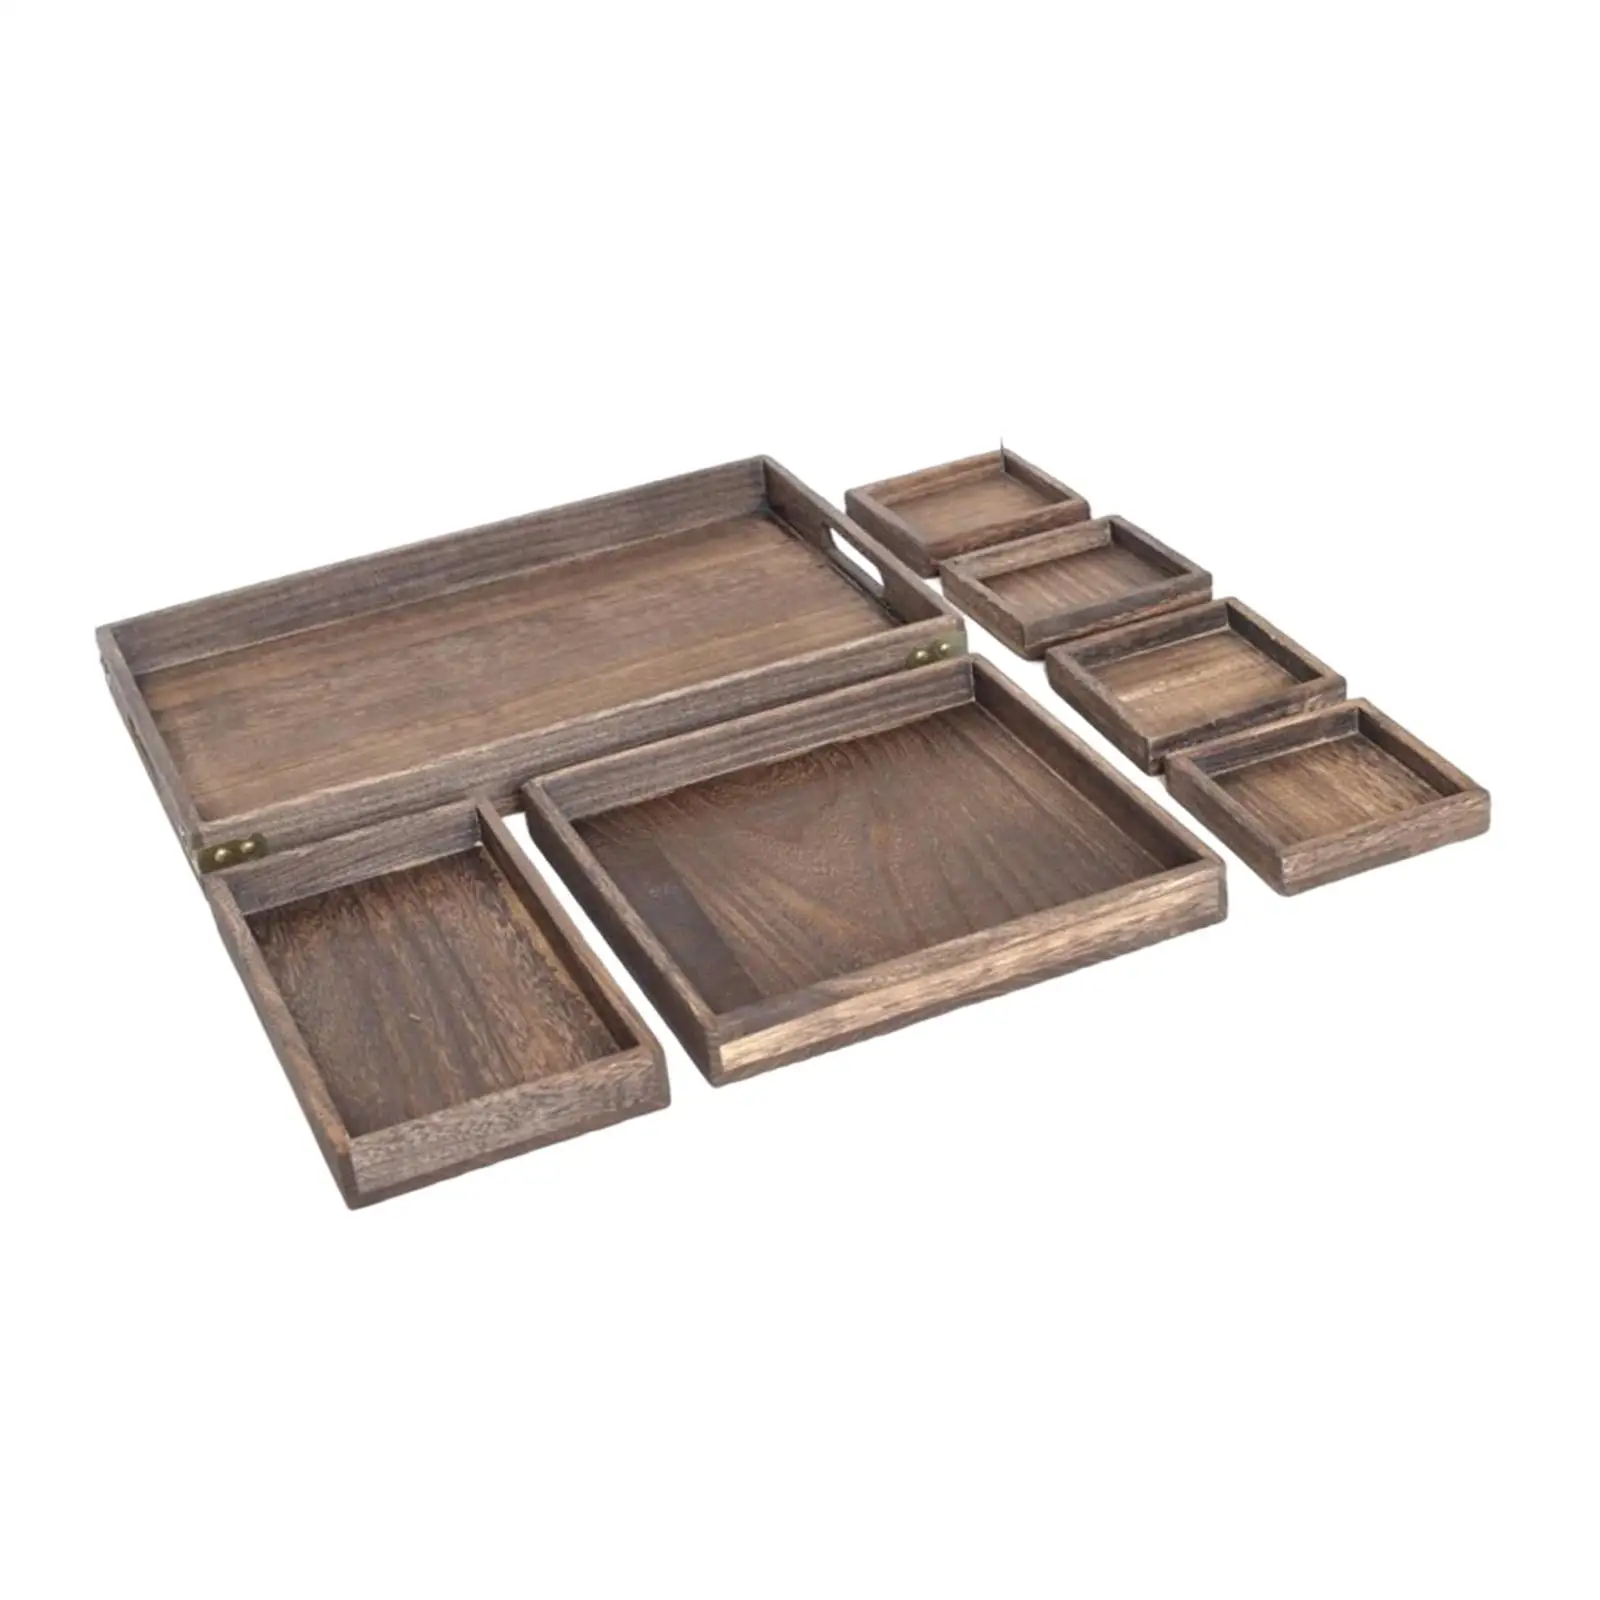 Set of 7 Wooden Serving Trays with Handle Stackable Eating Tray for Living Room, Bathroom or Desk Drawer Durable Versatile